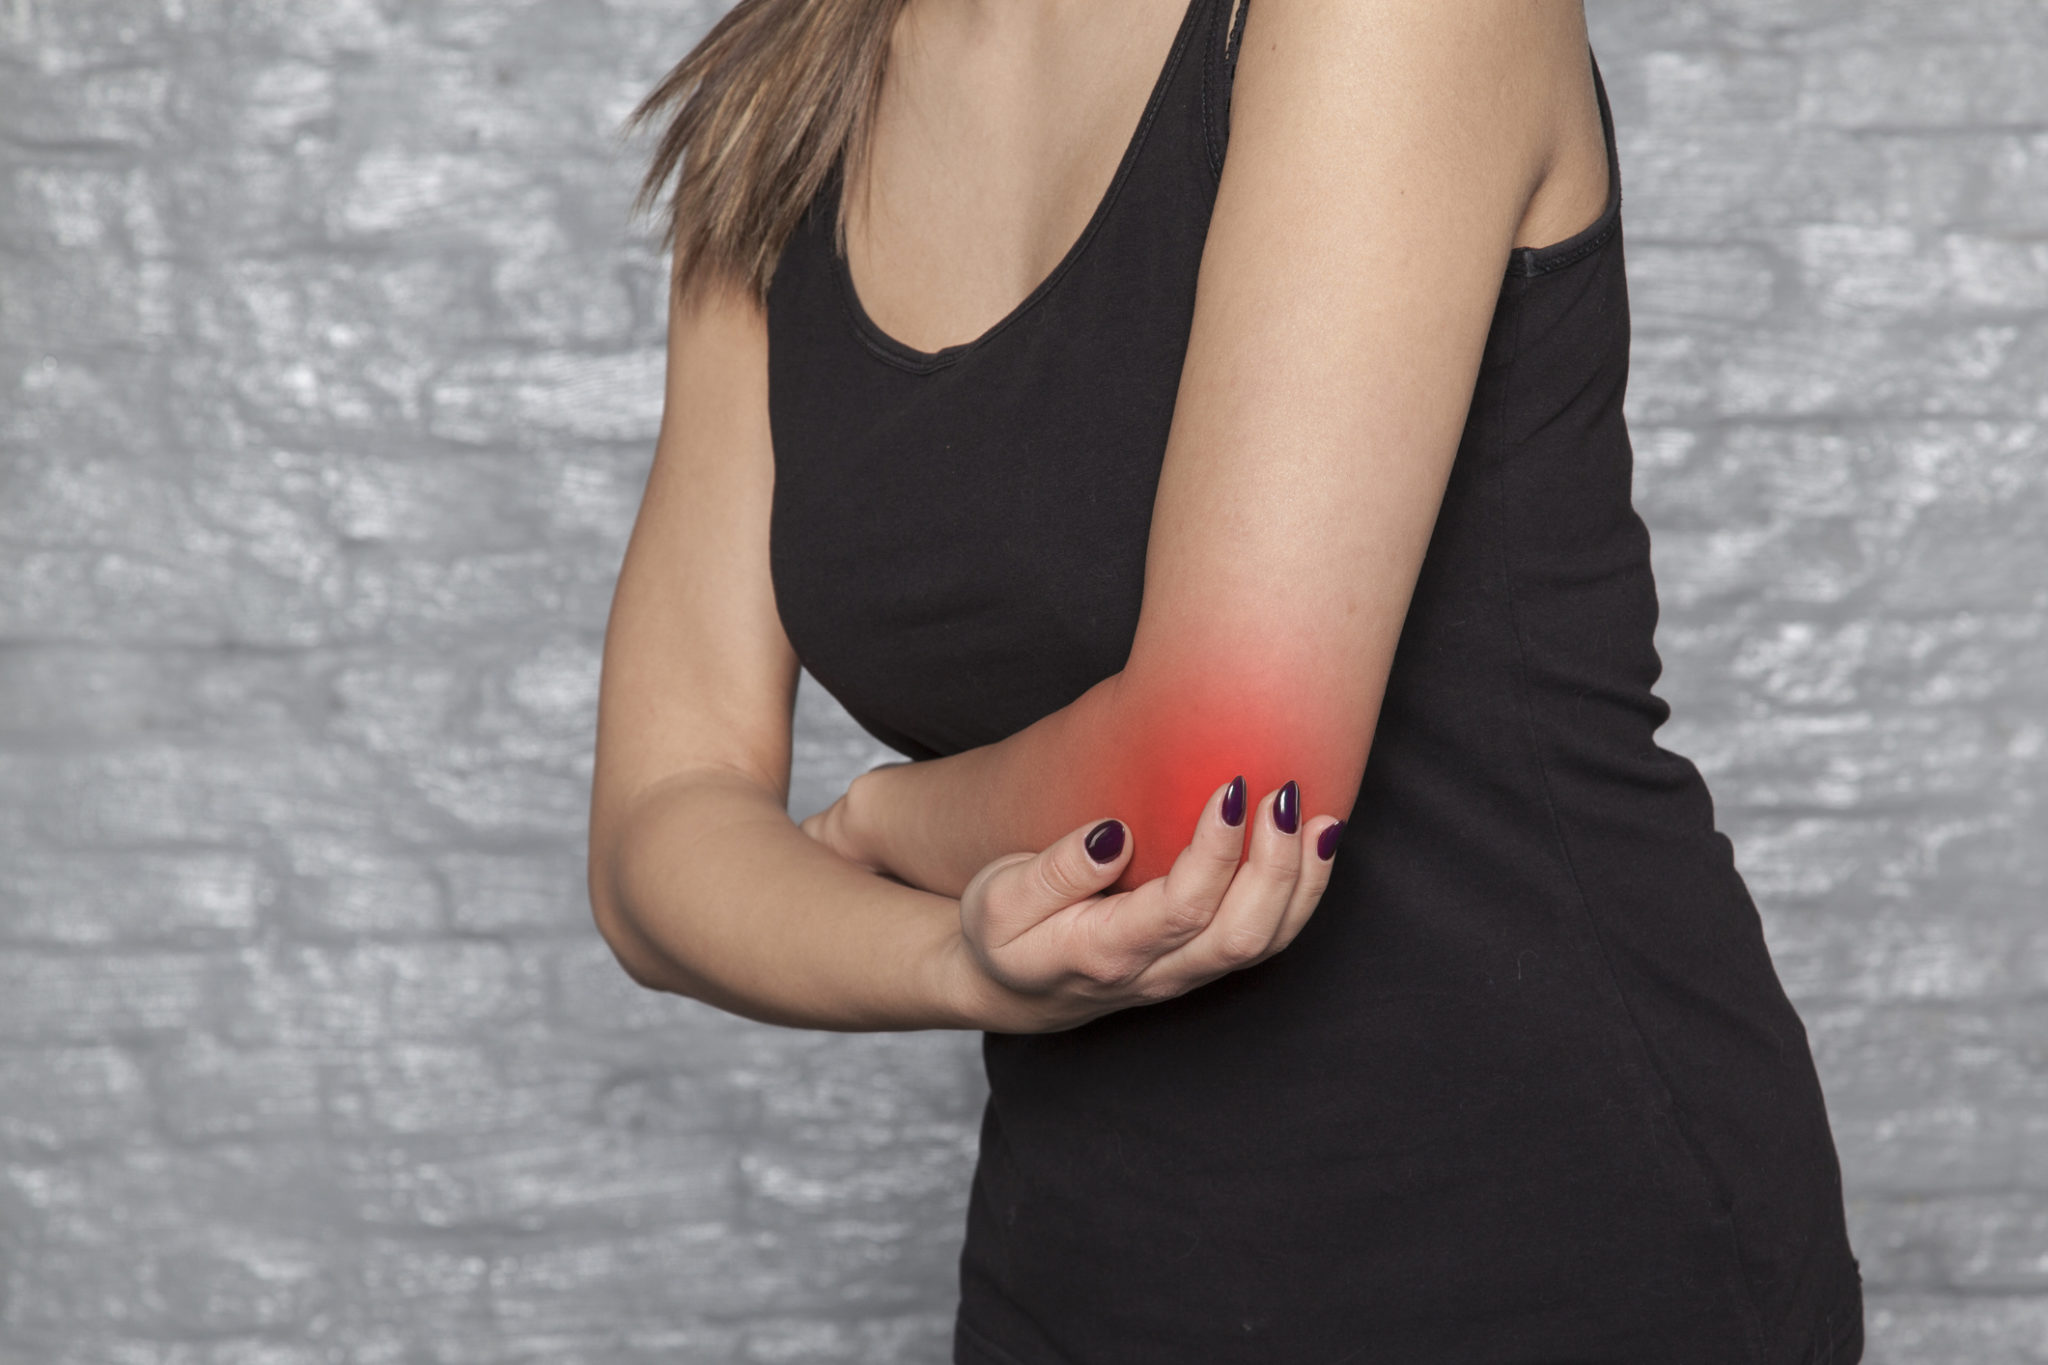 Elbow injury, the cause of great pain